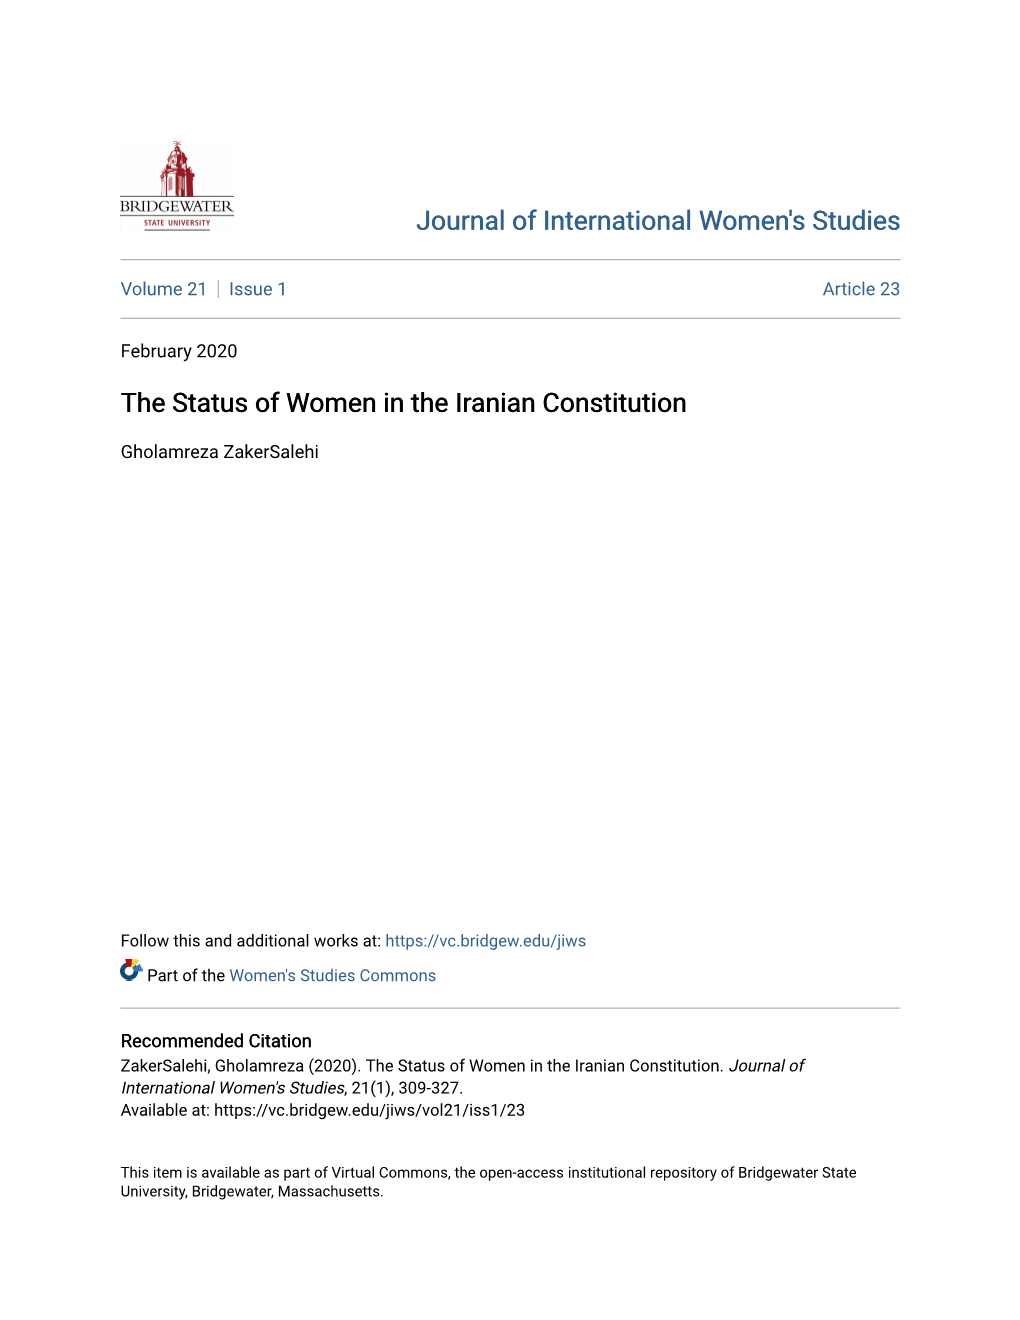 The Status of Women in the Iranian Constitution